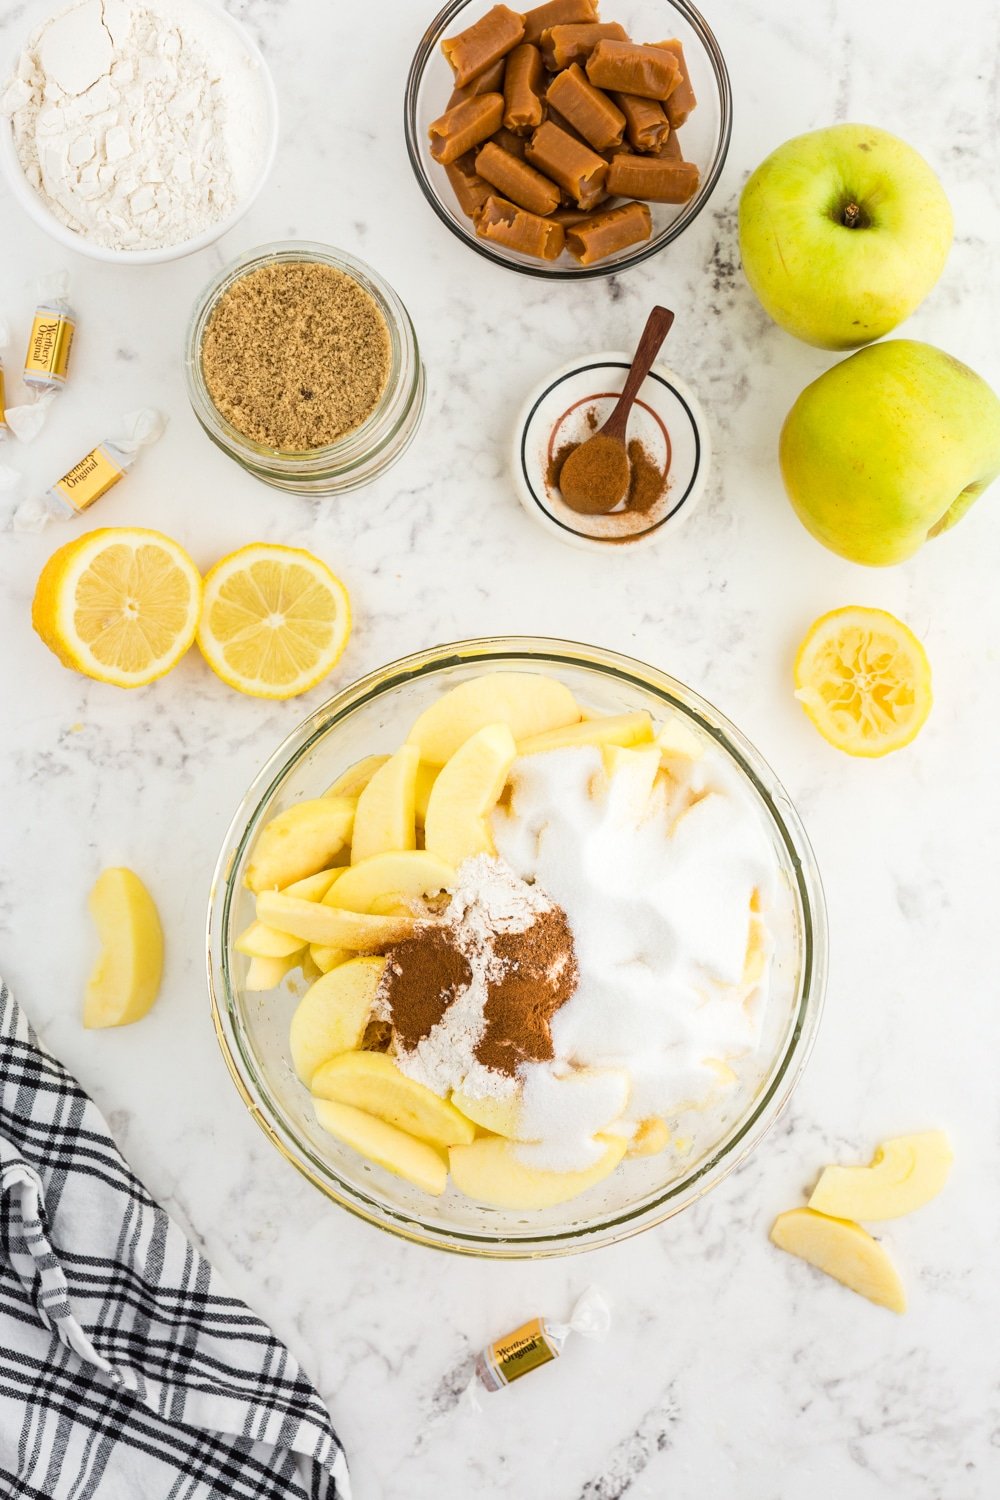 Large mixing bowl with sliced apples, flour, and spices, whole green apples, sliced lemons, black and white checkered linen, bowl of light brown sugar, bowl of granulated sugar, bowl of caramel candies, small bowl of nutmeg and cinnamon, on a white marble countertop.